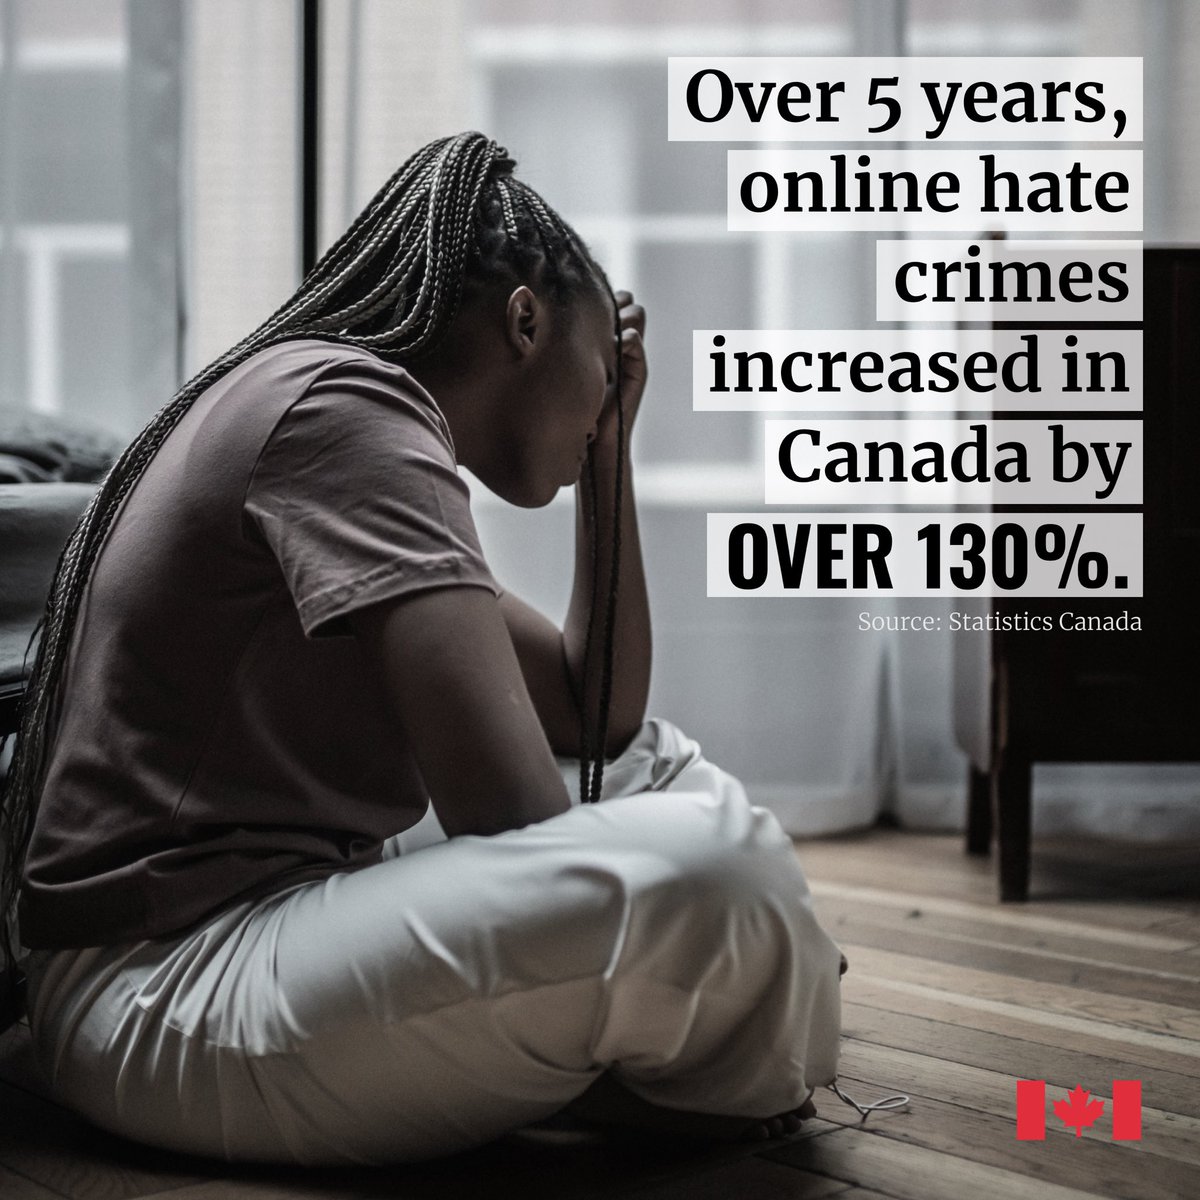 We have a targeted and measured plan to #ProtectKidsOnline and #StopHate. Families and victims told us what they need. We listened. 

Will Conservatives get on board with the Online Harms Act or abandon our kids and vulnerable communities to be abused and harassed online?